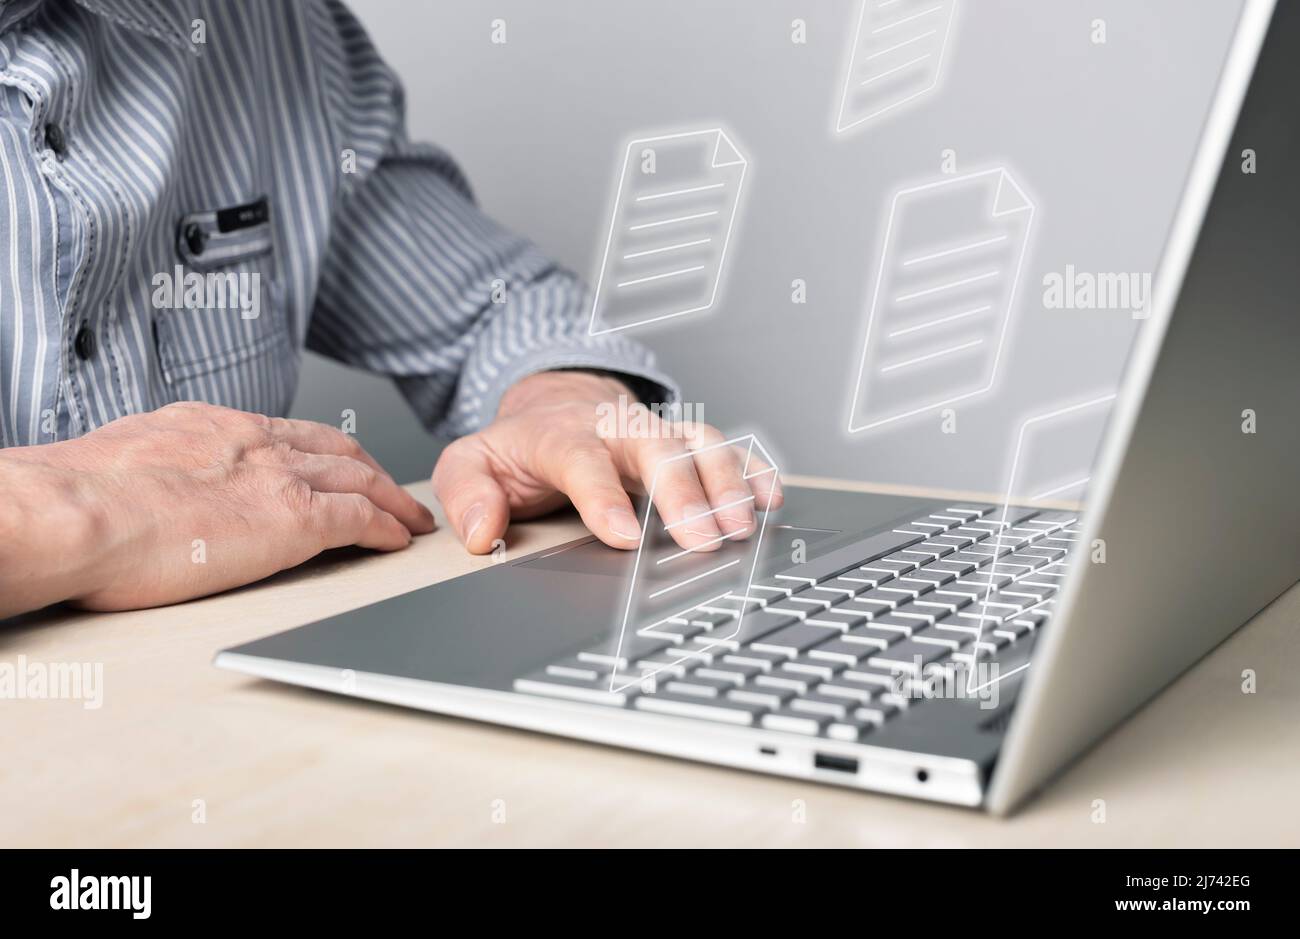 Businessman using laptop for electronic documents, letters sending and receiving. Man sitting at desk with computer. Online communication and paper flow concept. High quality photo Stock Photo